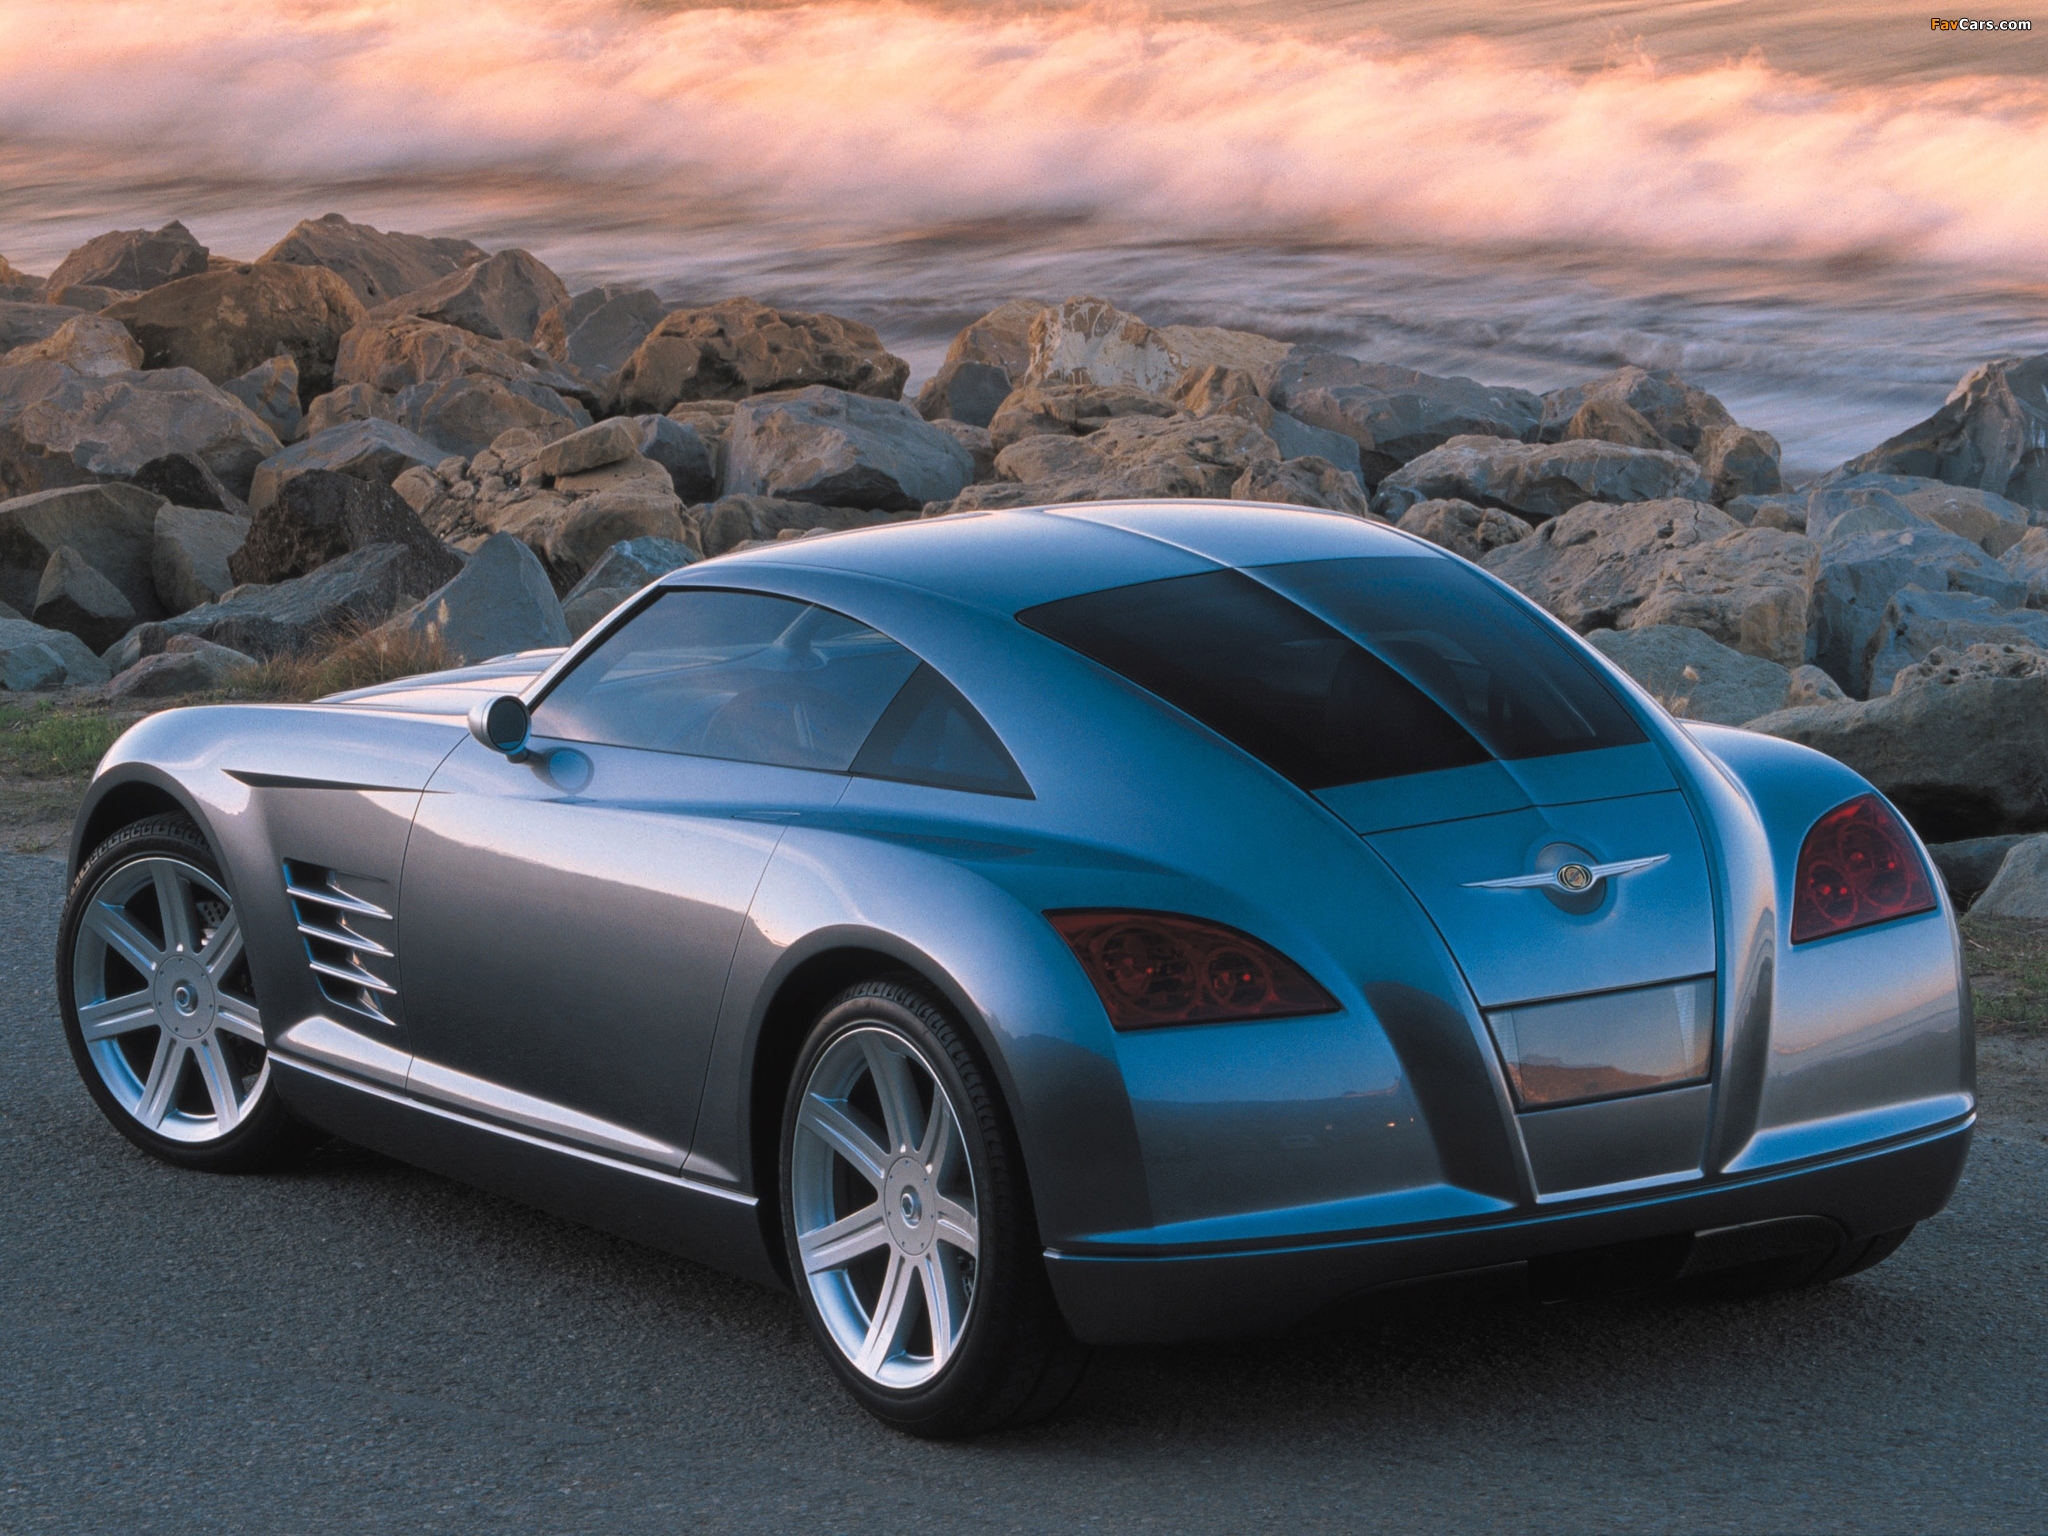 Chrysler Crossfire Concept 2001 pictures (2048 x 1536)